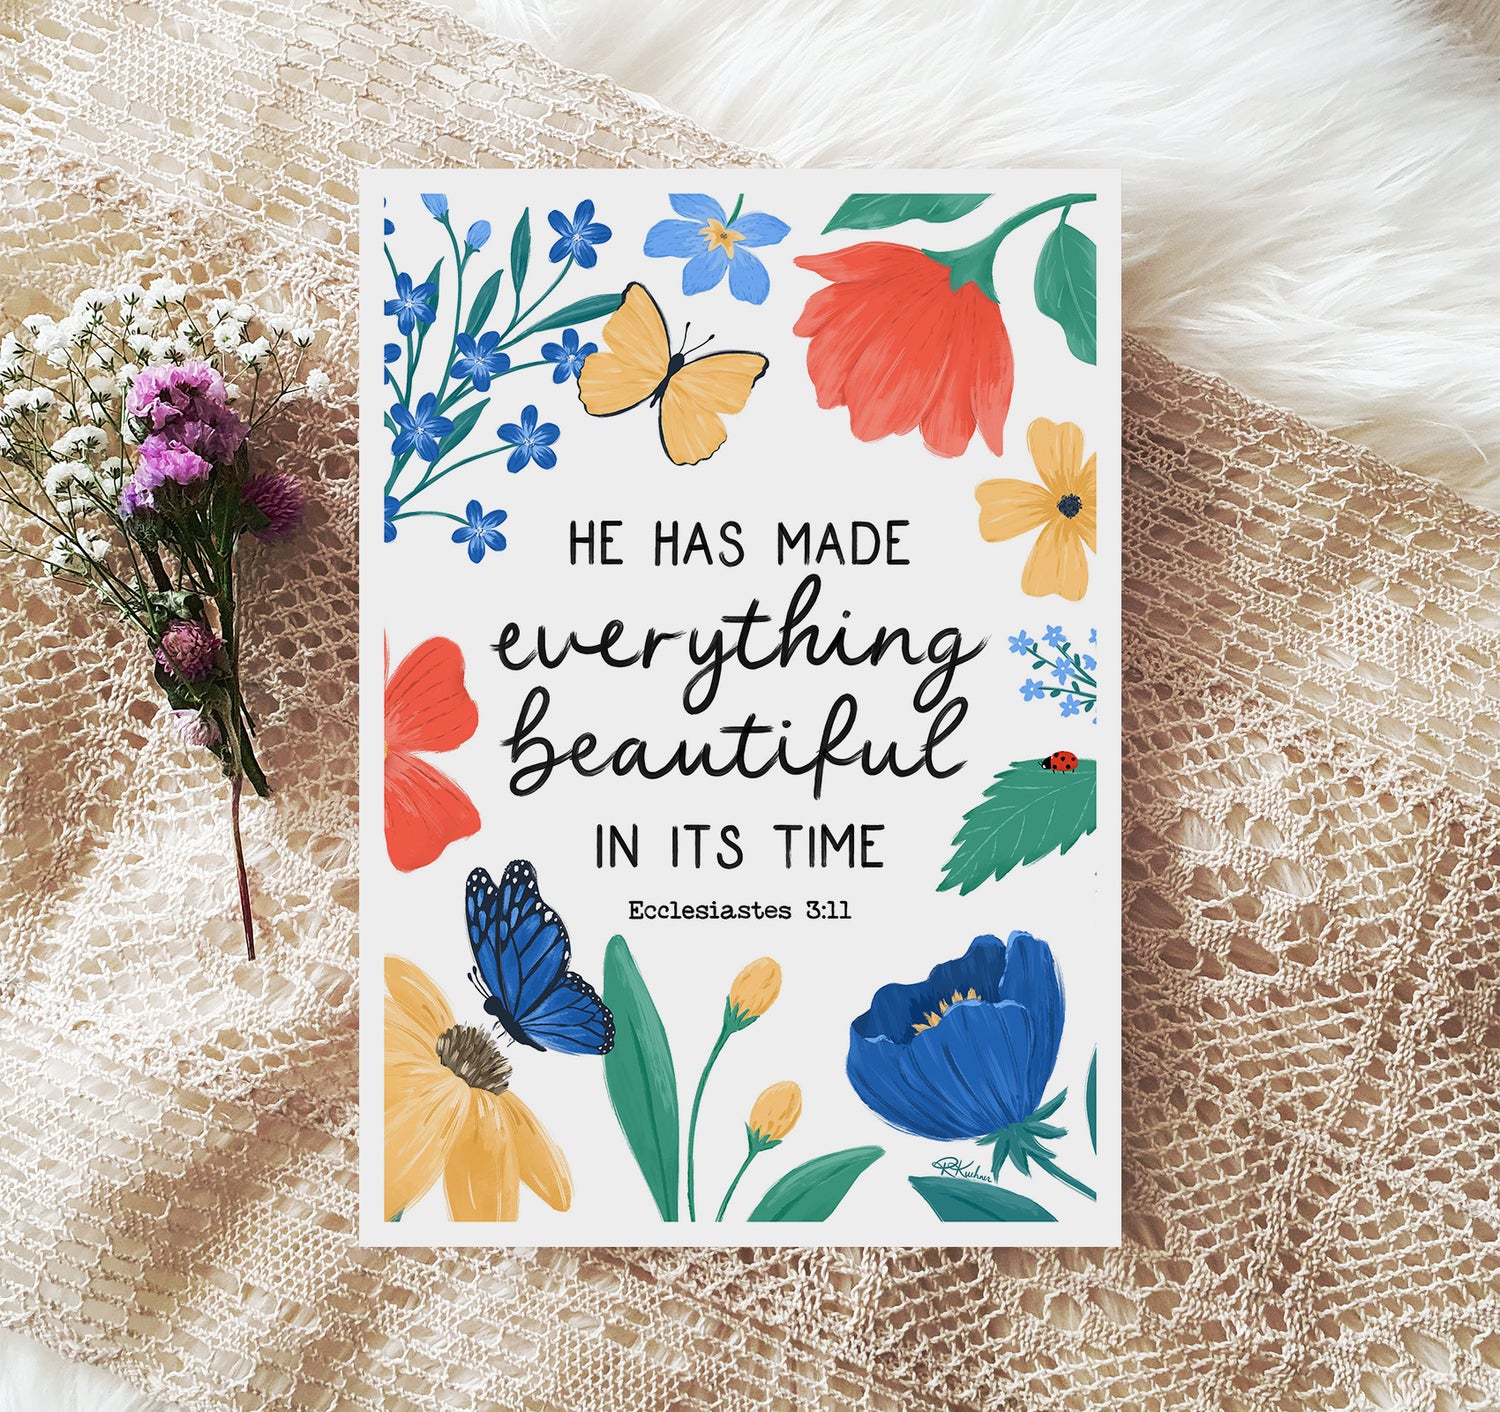 He has made everything beautiful in its time, Ecclesiastes 3:11 Bible verse art print with bright flowers, butterflies, and a ladybug